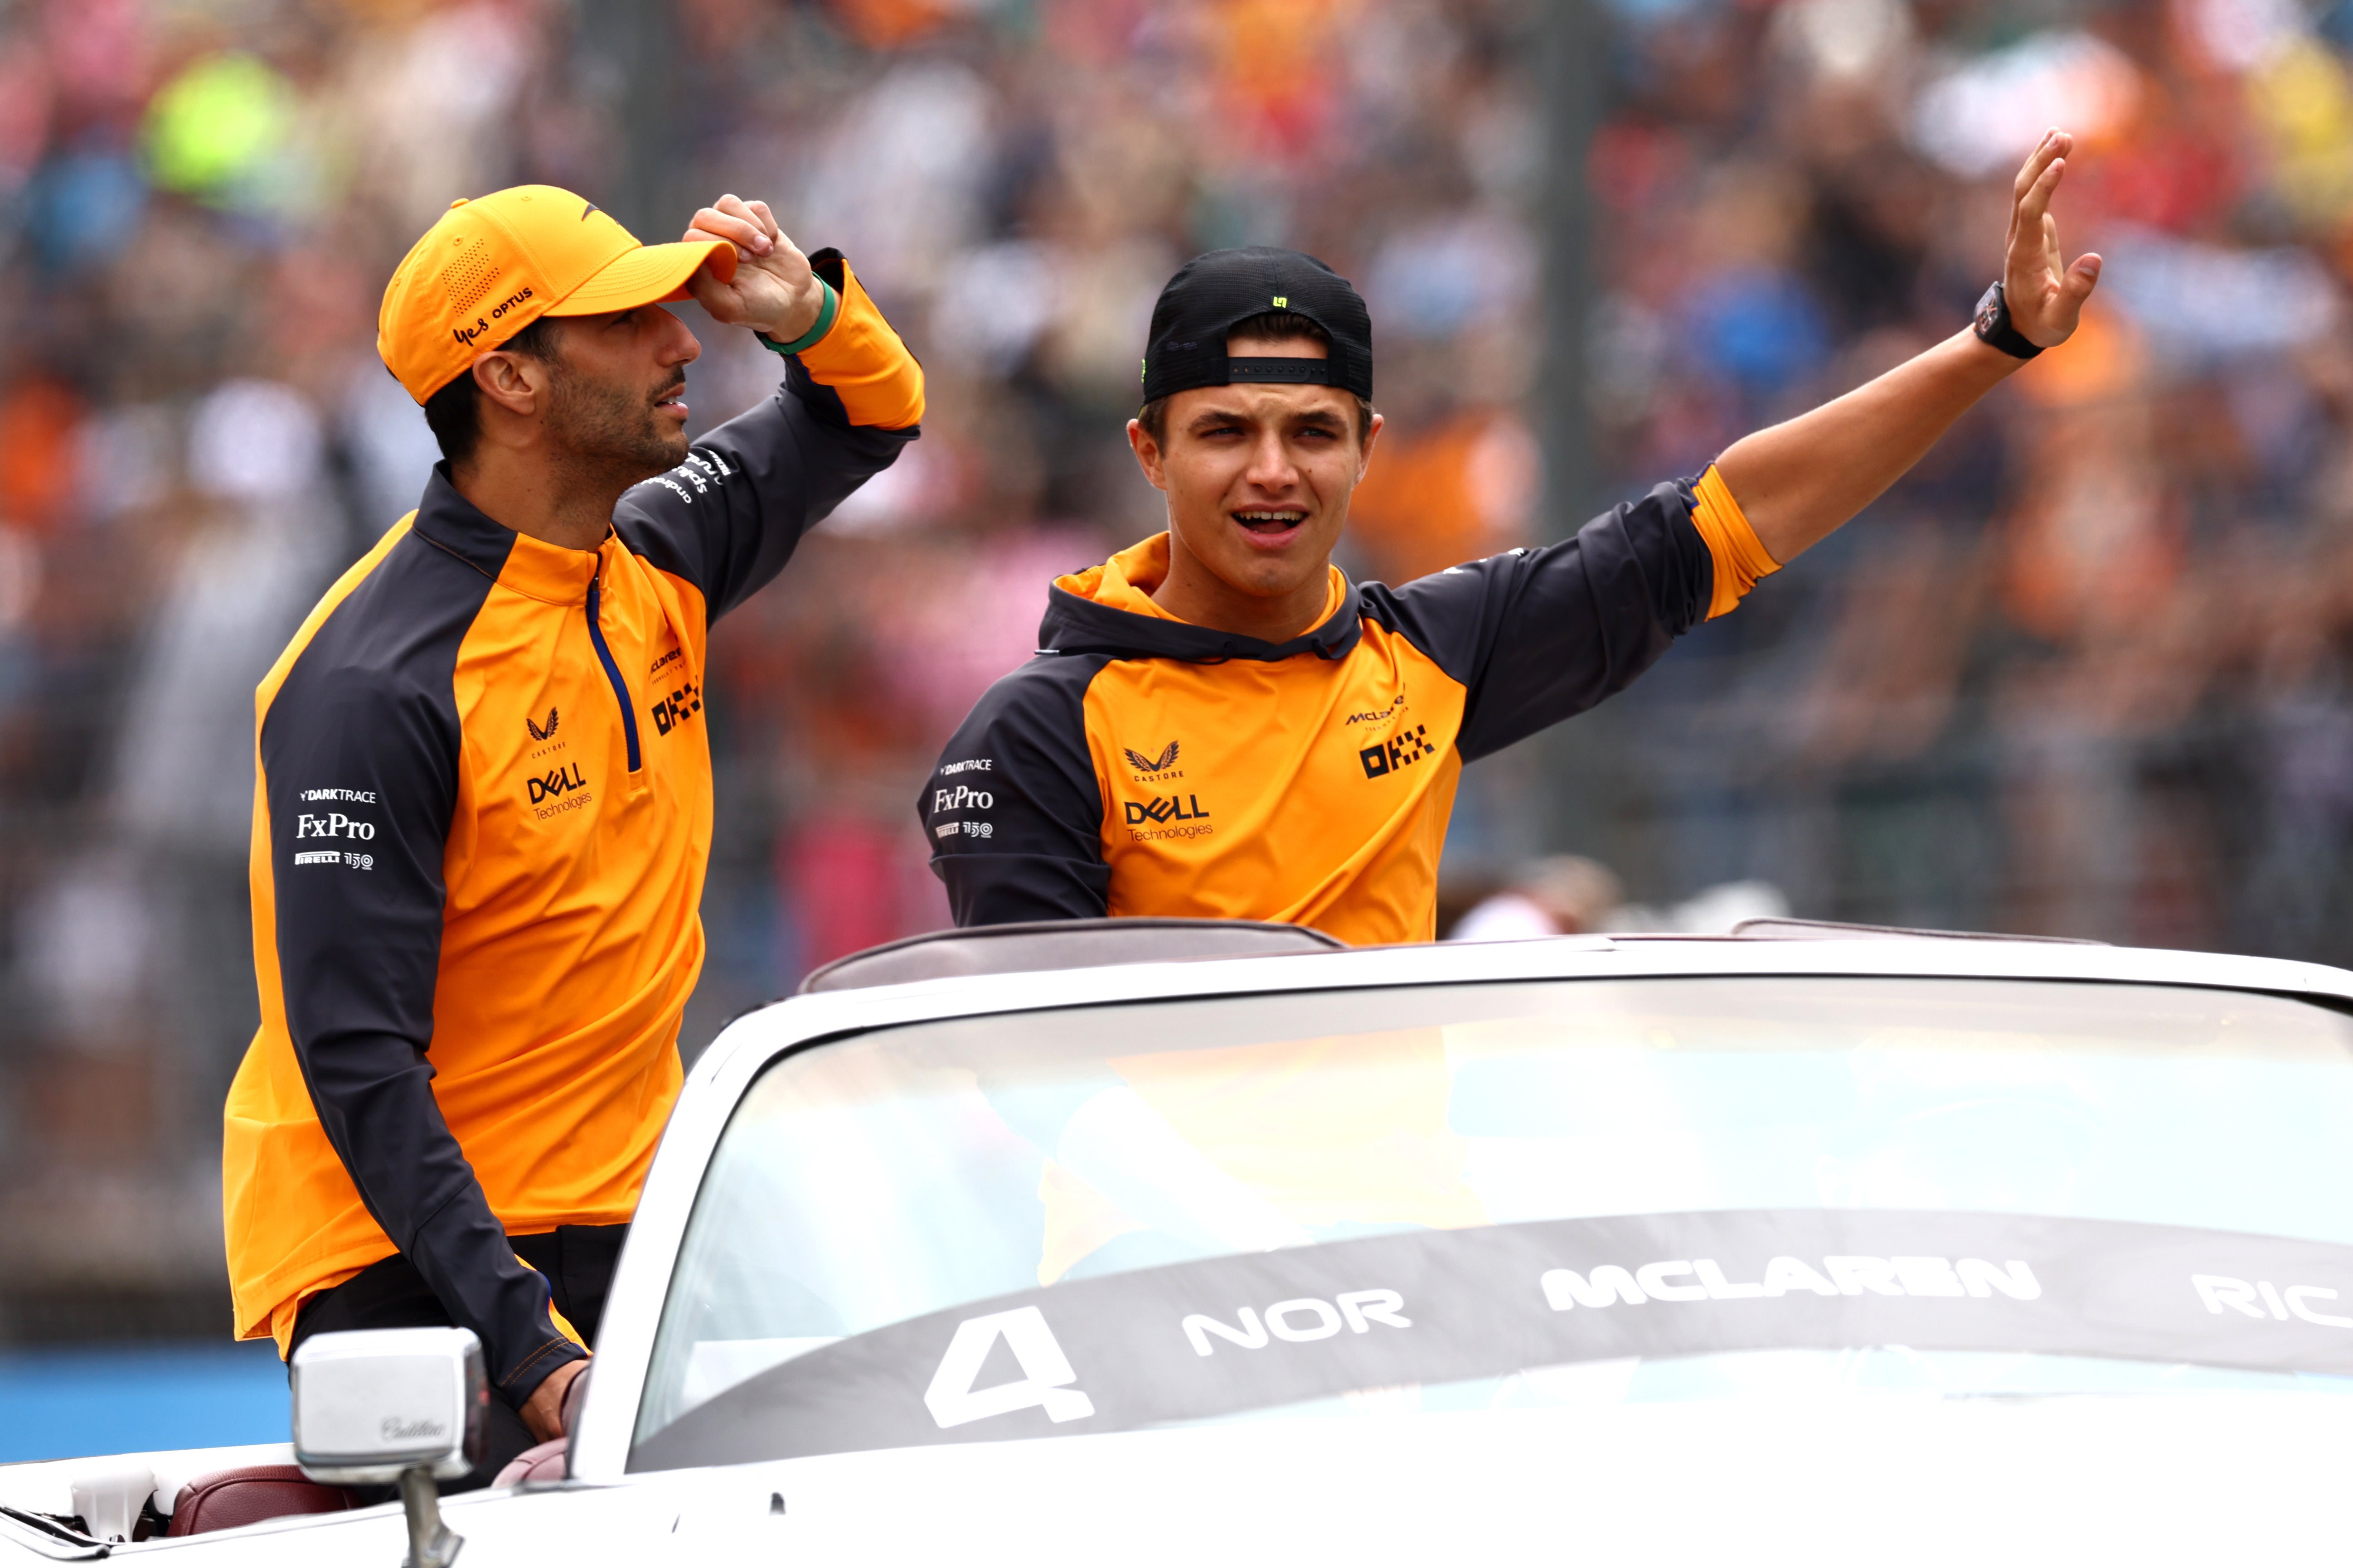 Ricciardo and Norris wave to fans in Hungary